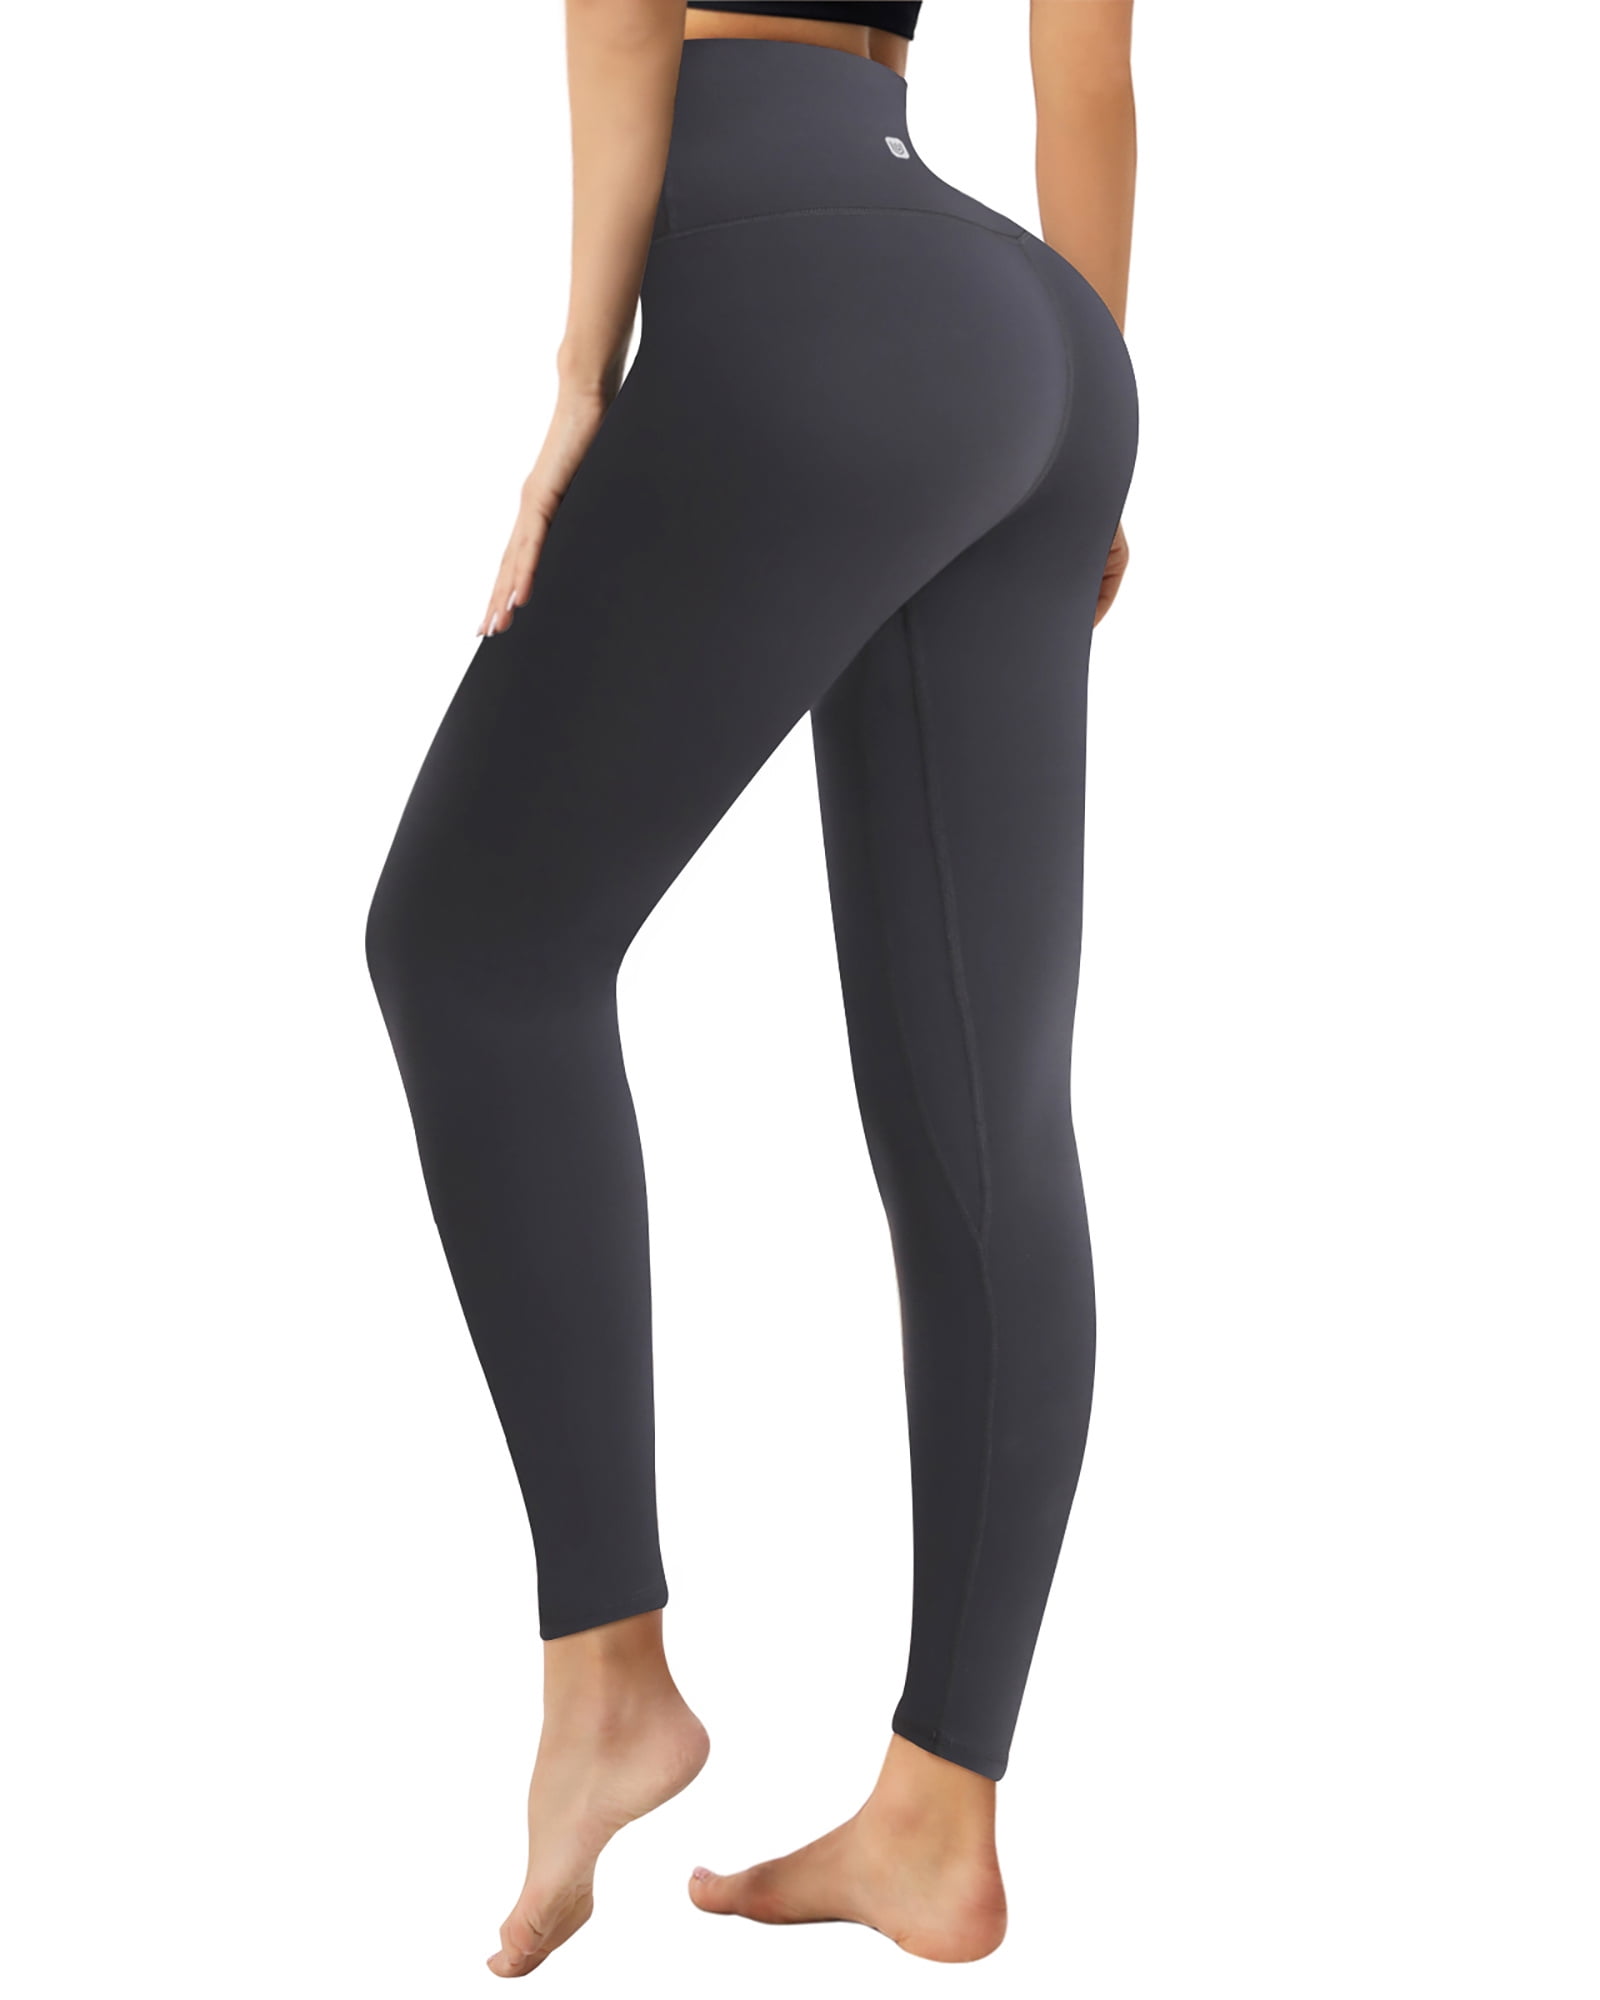 Buy Yvete Athletic Leggings Yoga Pants for Women, High Waist, Buttery Soft  Non See-Through Workout Running Tights Black at